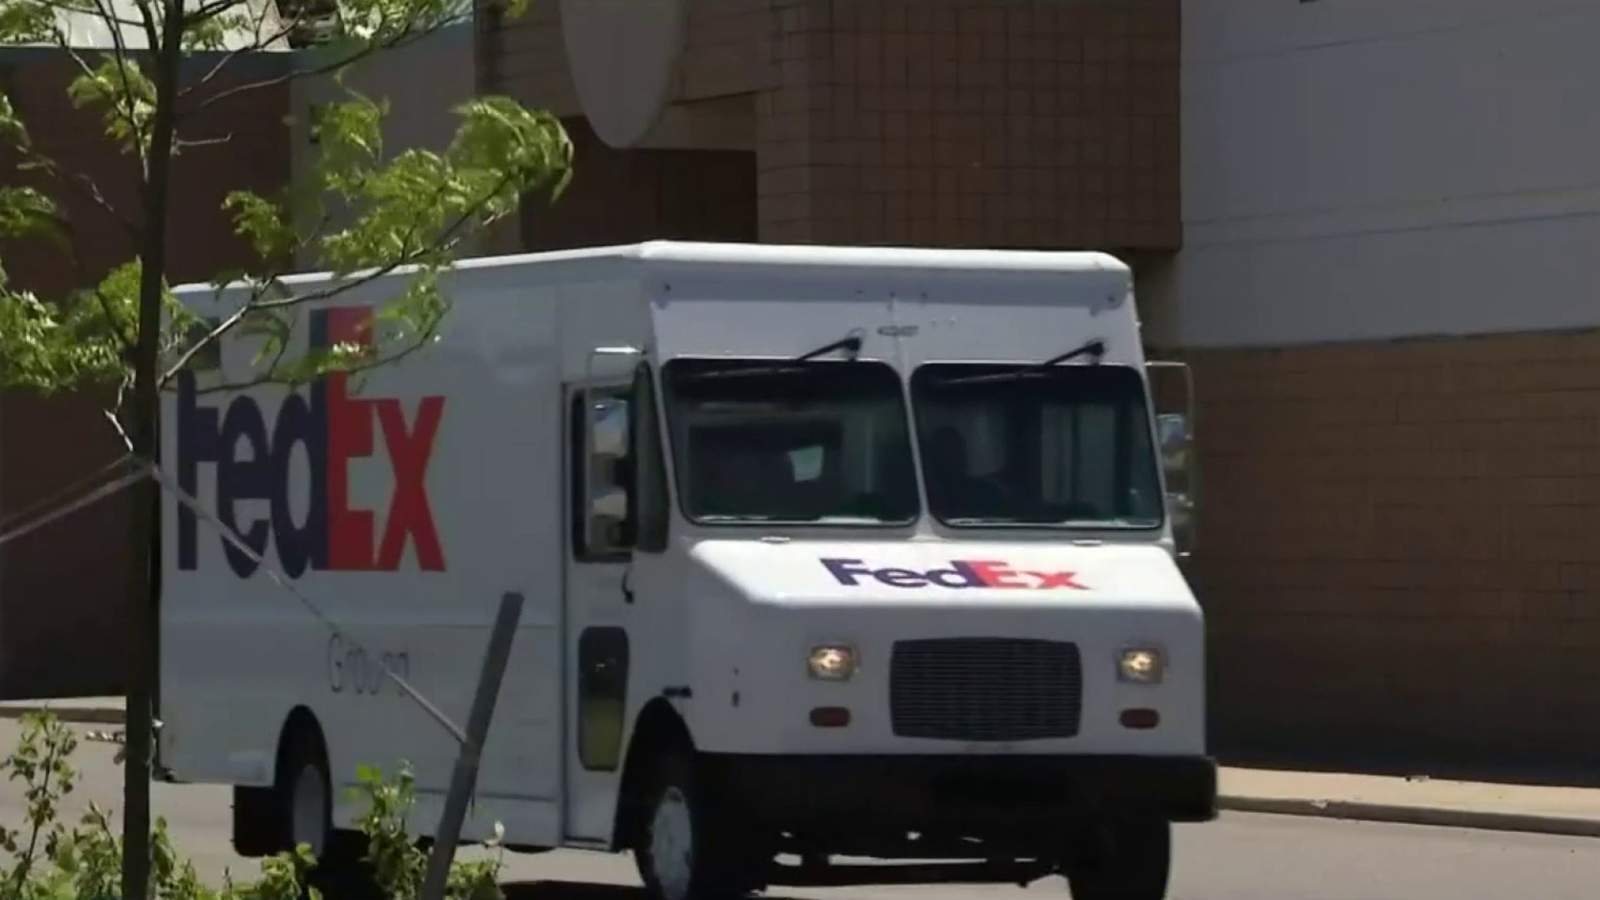 Oak Park FedEx taking steps to fix package delivery issue